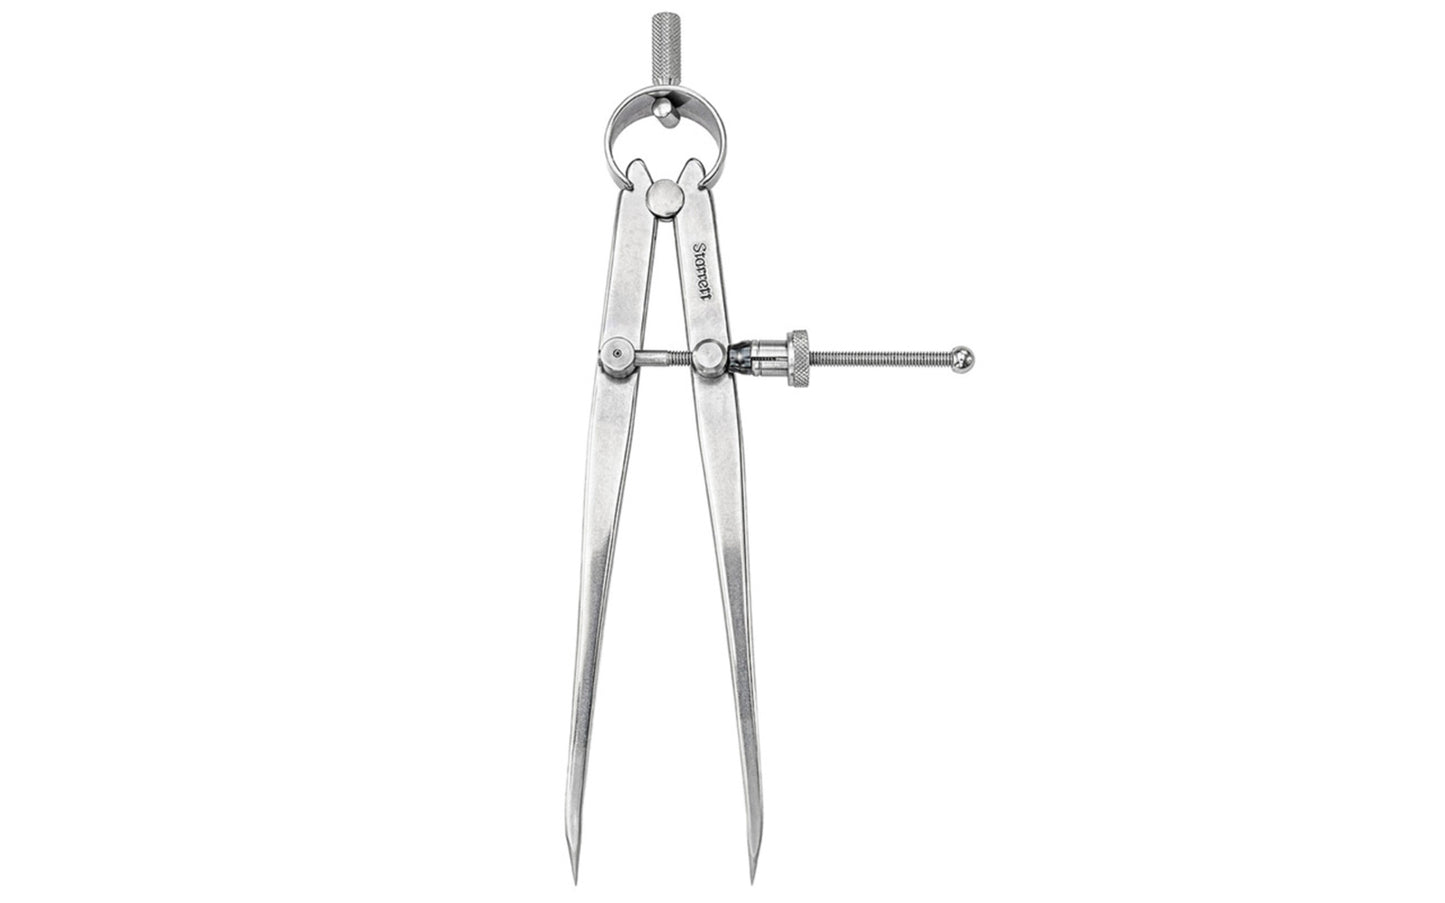 Starrett 83 Series 6" "Yankee" Spring-Type Dividers with Flat Legs & Quick-Spring Nut are made from a high-grade steel & well-finished. The legs are made of flat stock & are very durable. Dividers feature a hardened fulcrum stud, strong & flexible bow string. Divider size & capacity is 6". Model 83B-6. Made in USA.